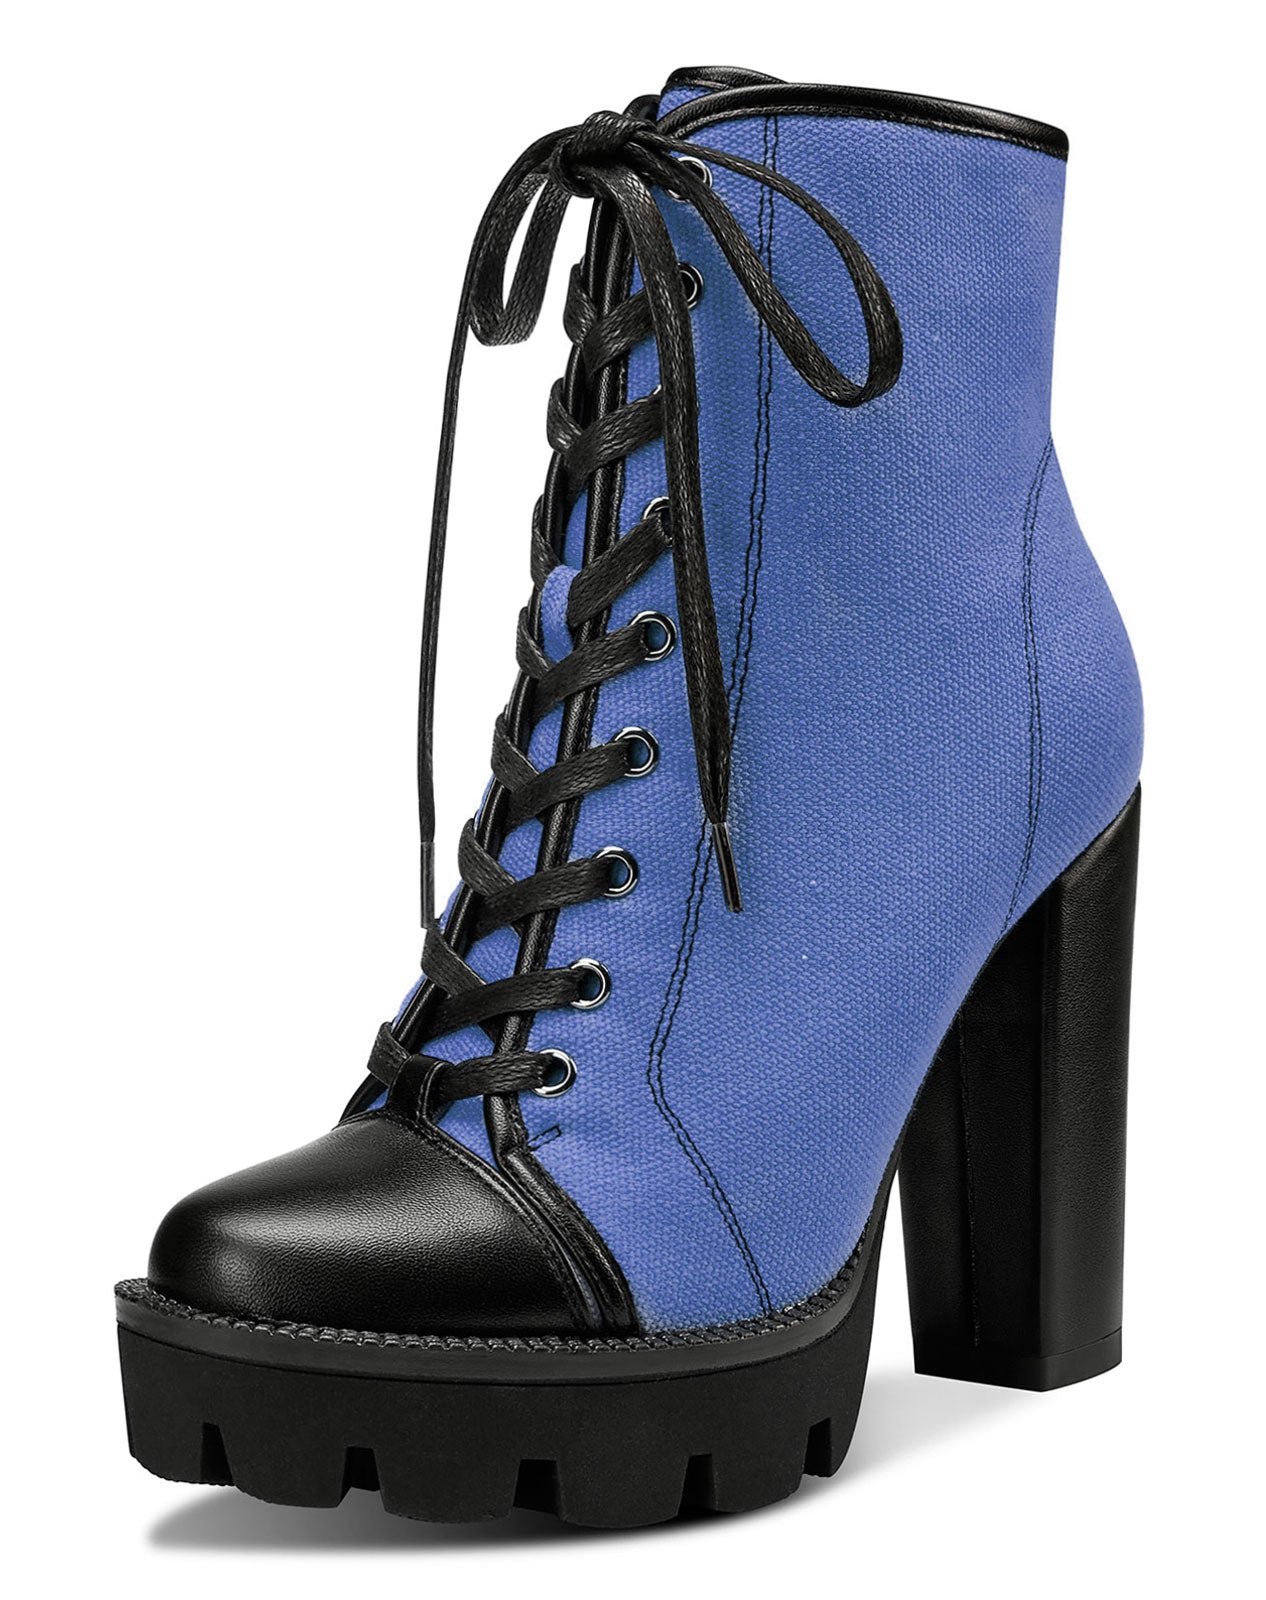 Buy Lace up High Heels Online In India - Etsy India